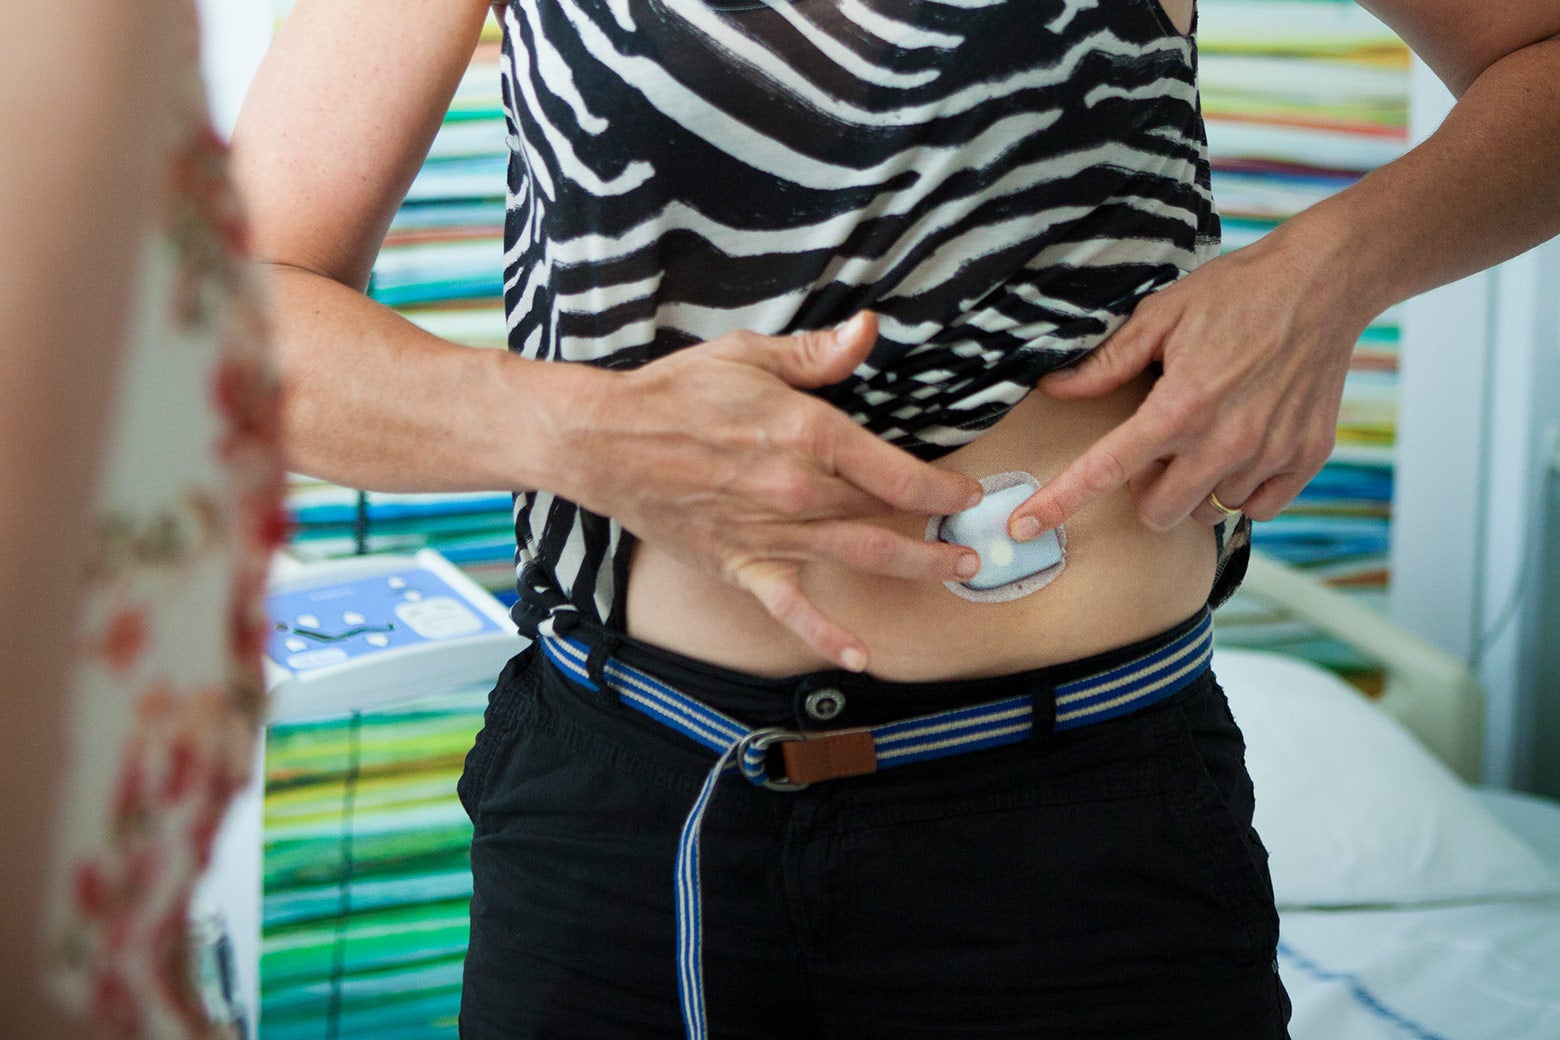 A person with their shirt pulled up to show off an insulin pump against her stomach.